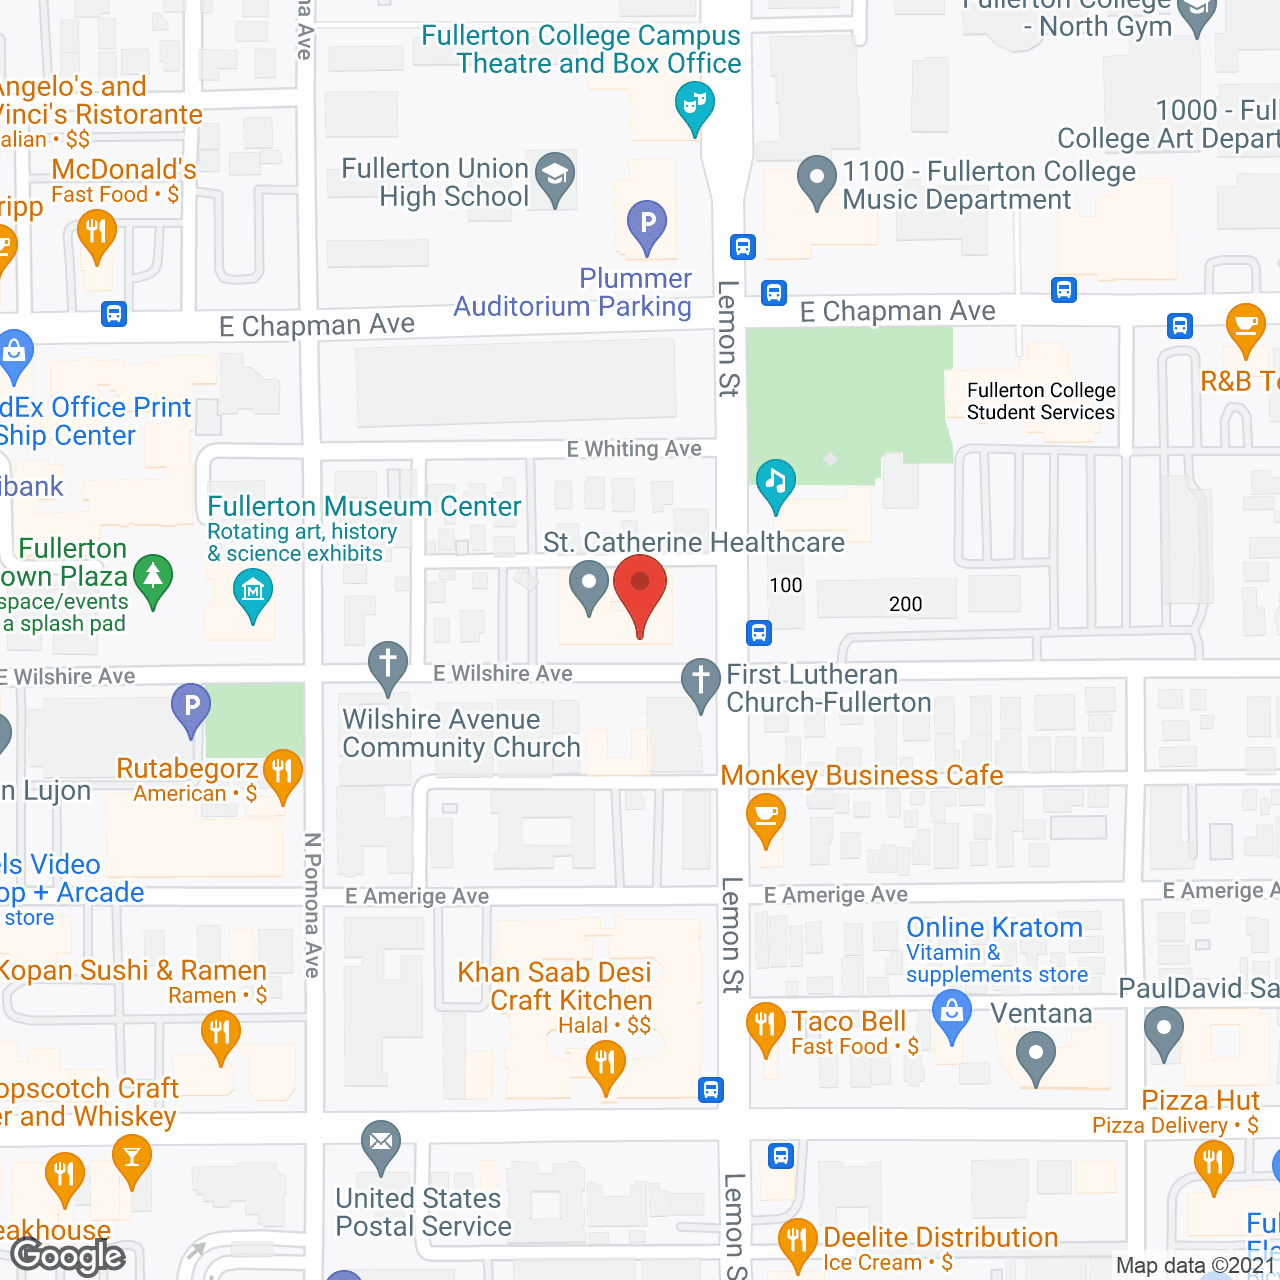 St. Catherine Healthcare in google map